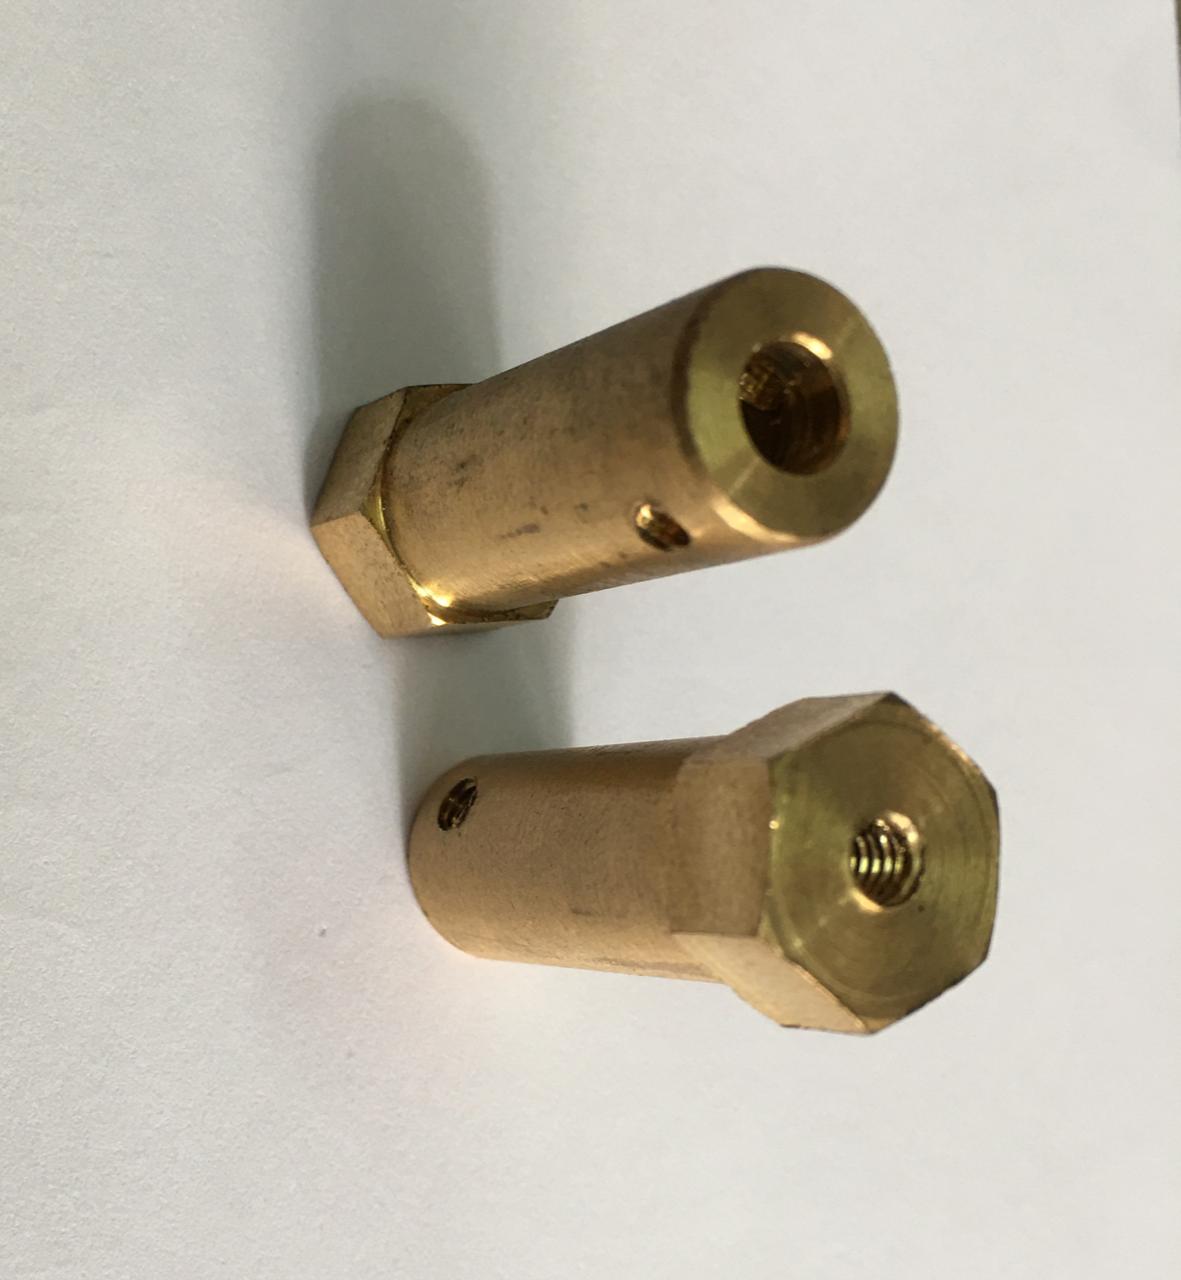 4mm Brass Hex Coupling For 85mm Wheel